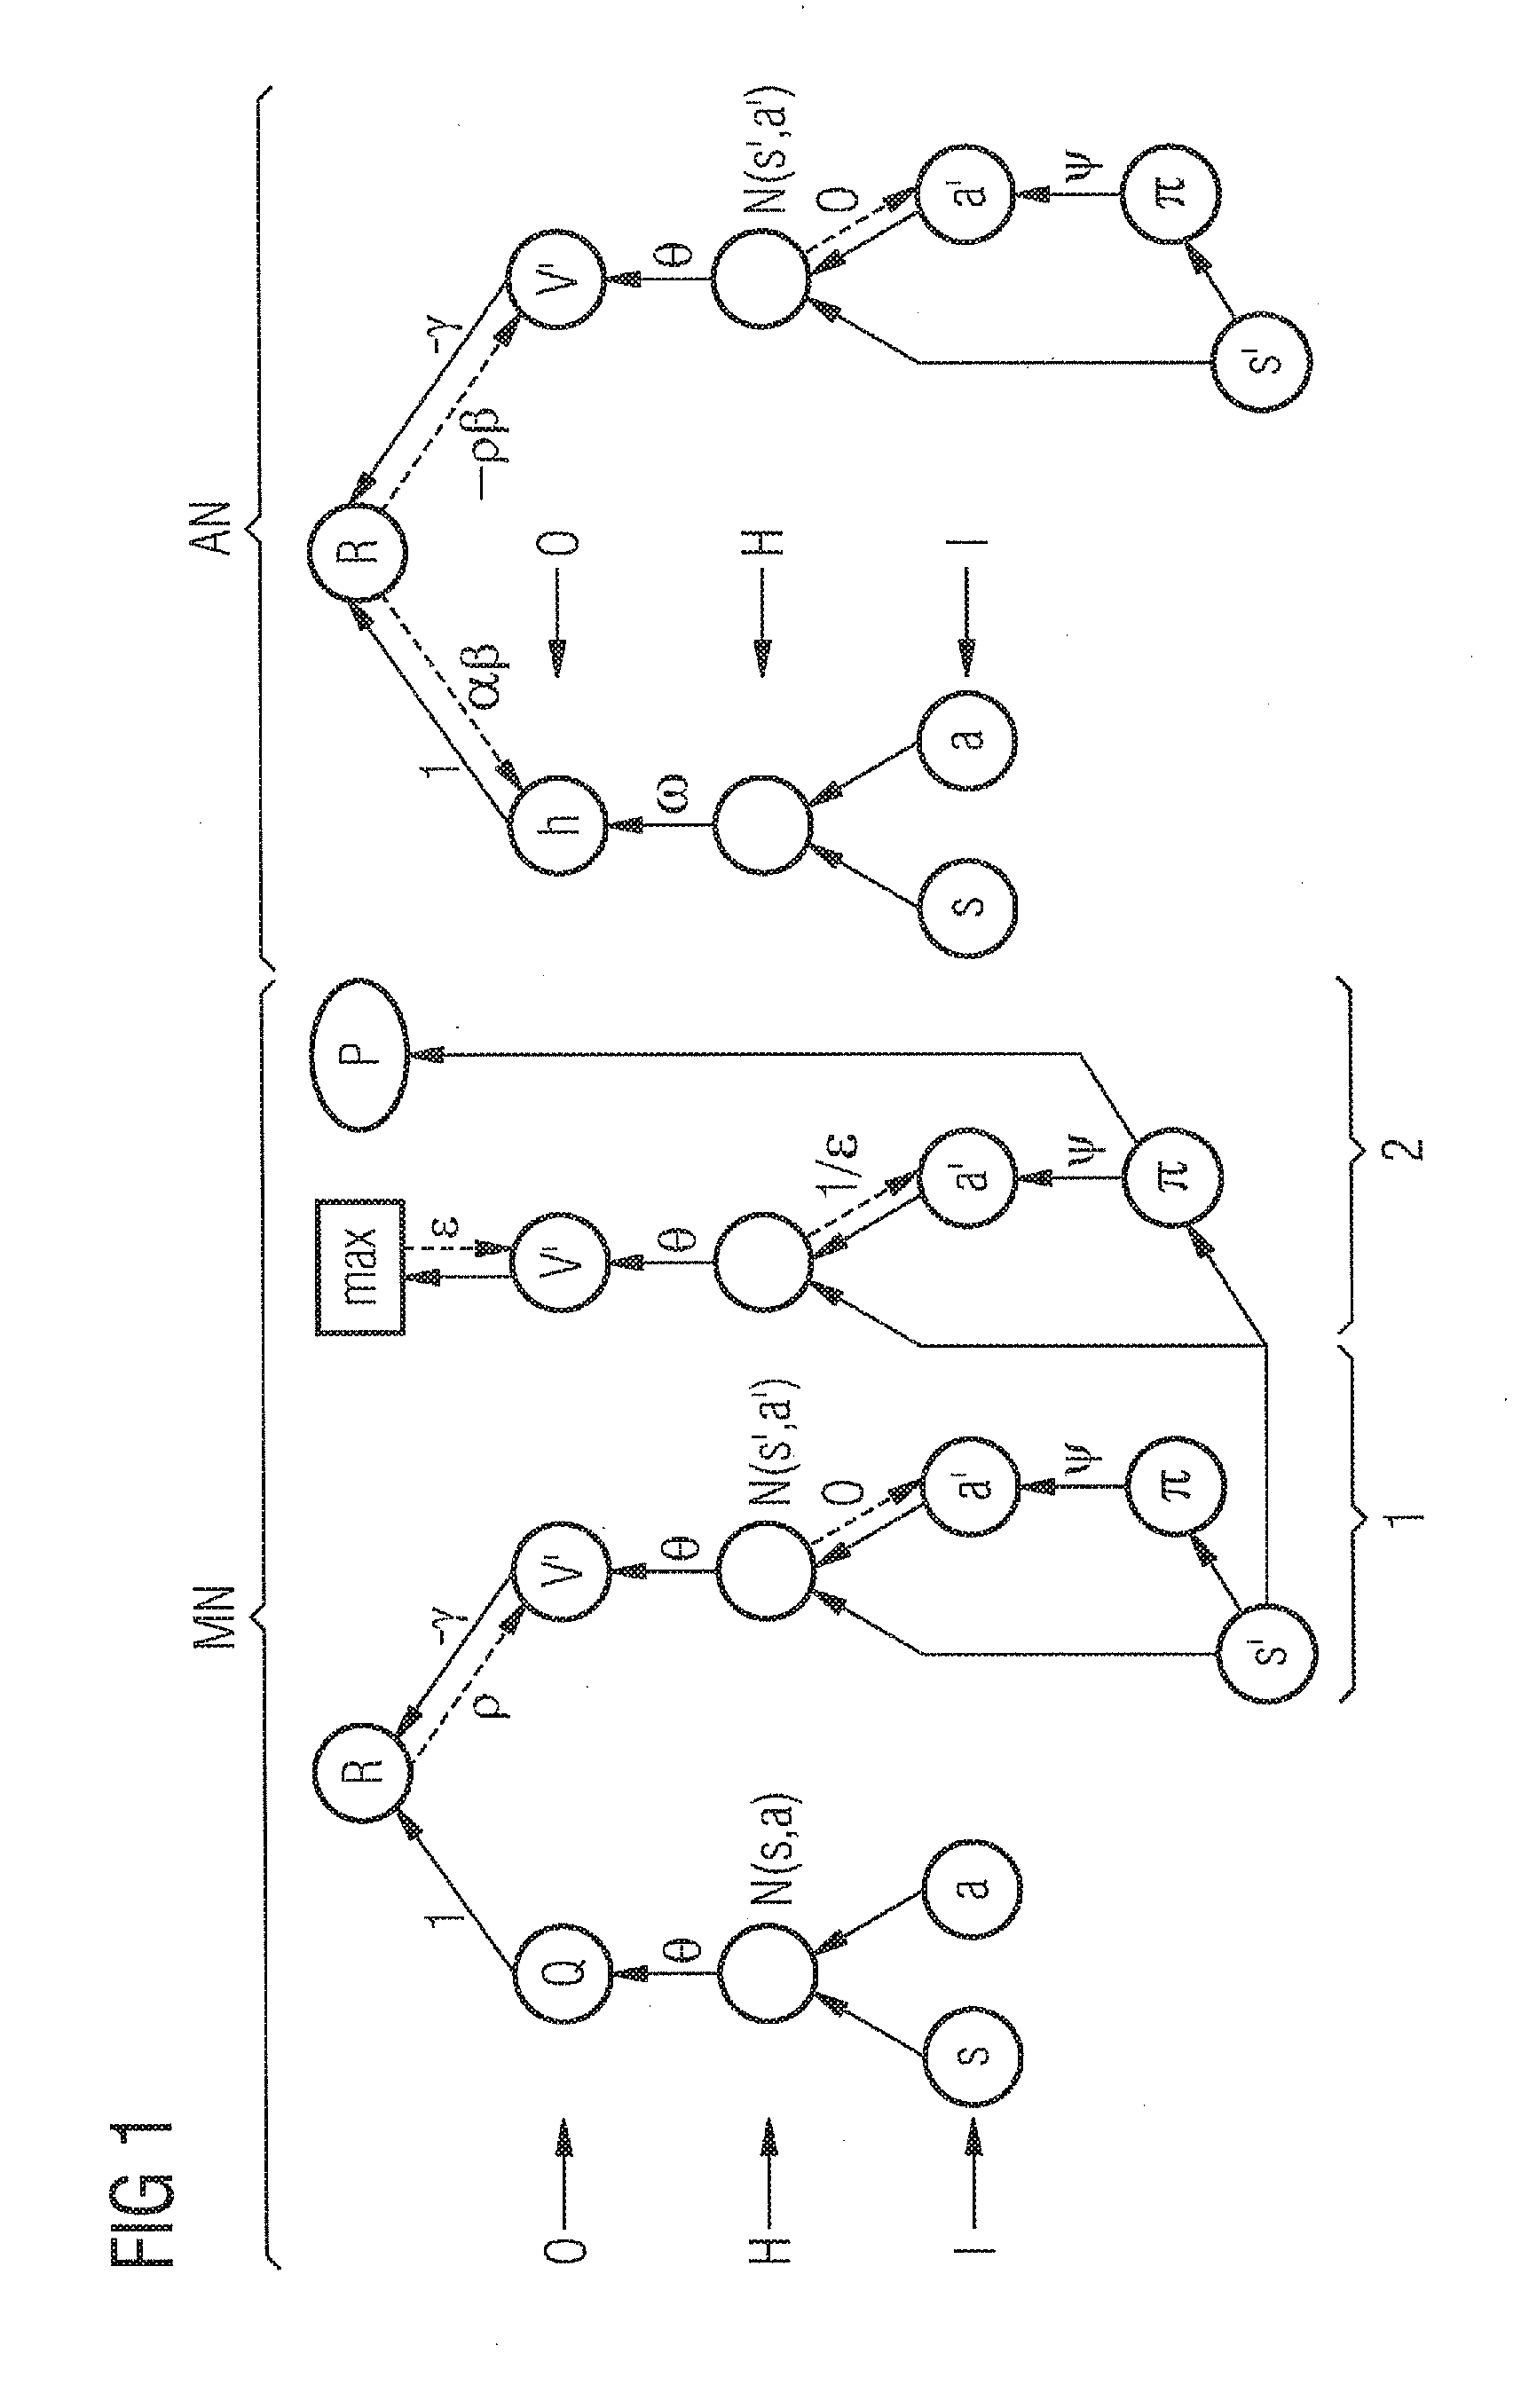 Method for computer-aided control and/or regulation using neural networks